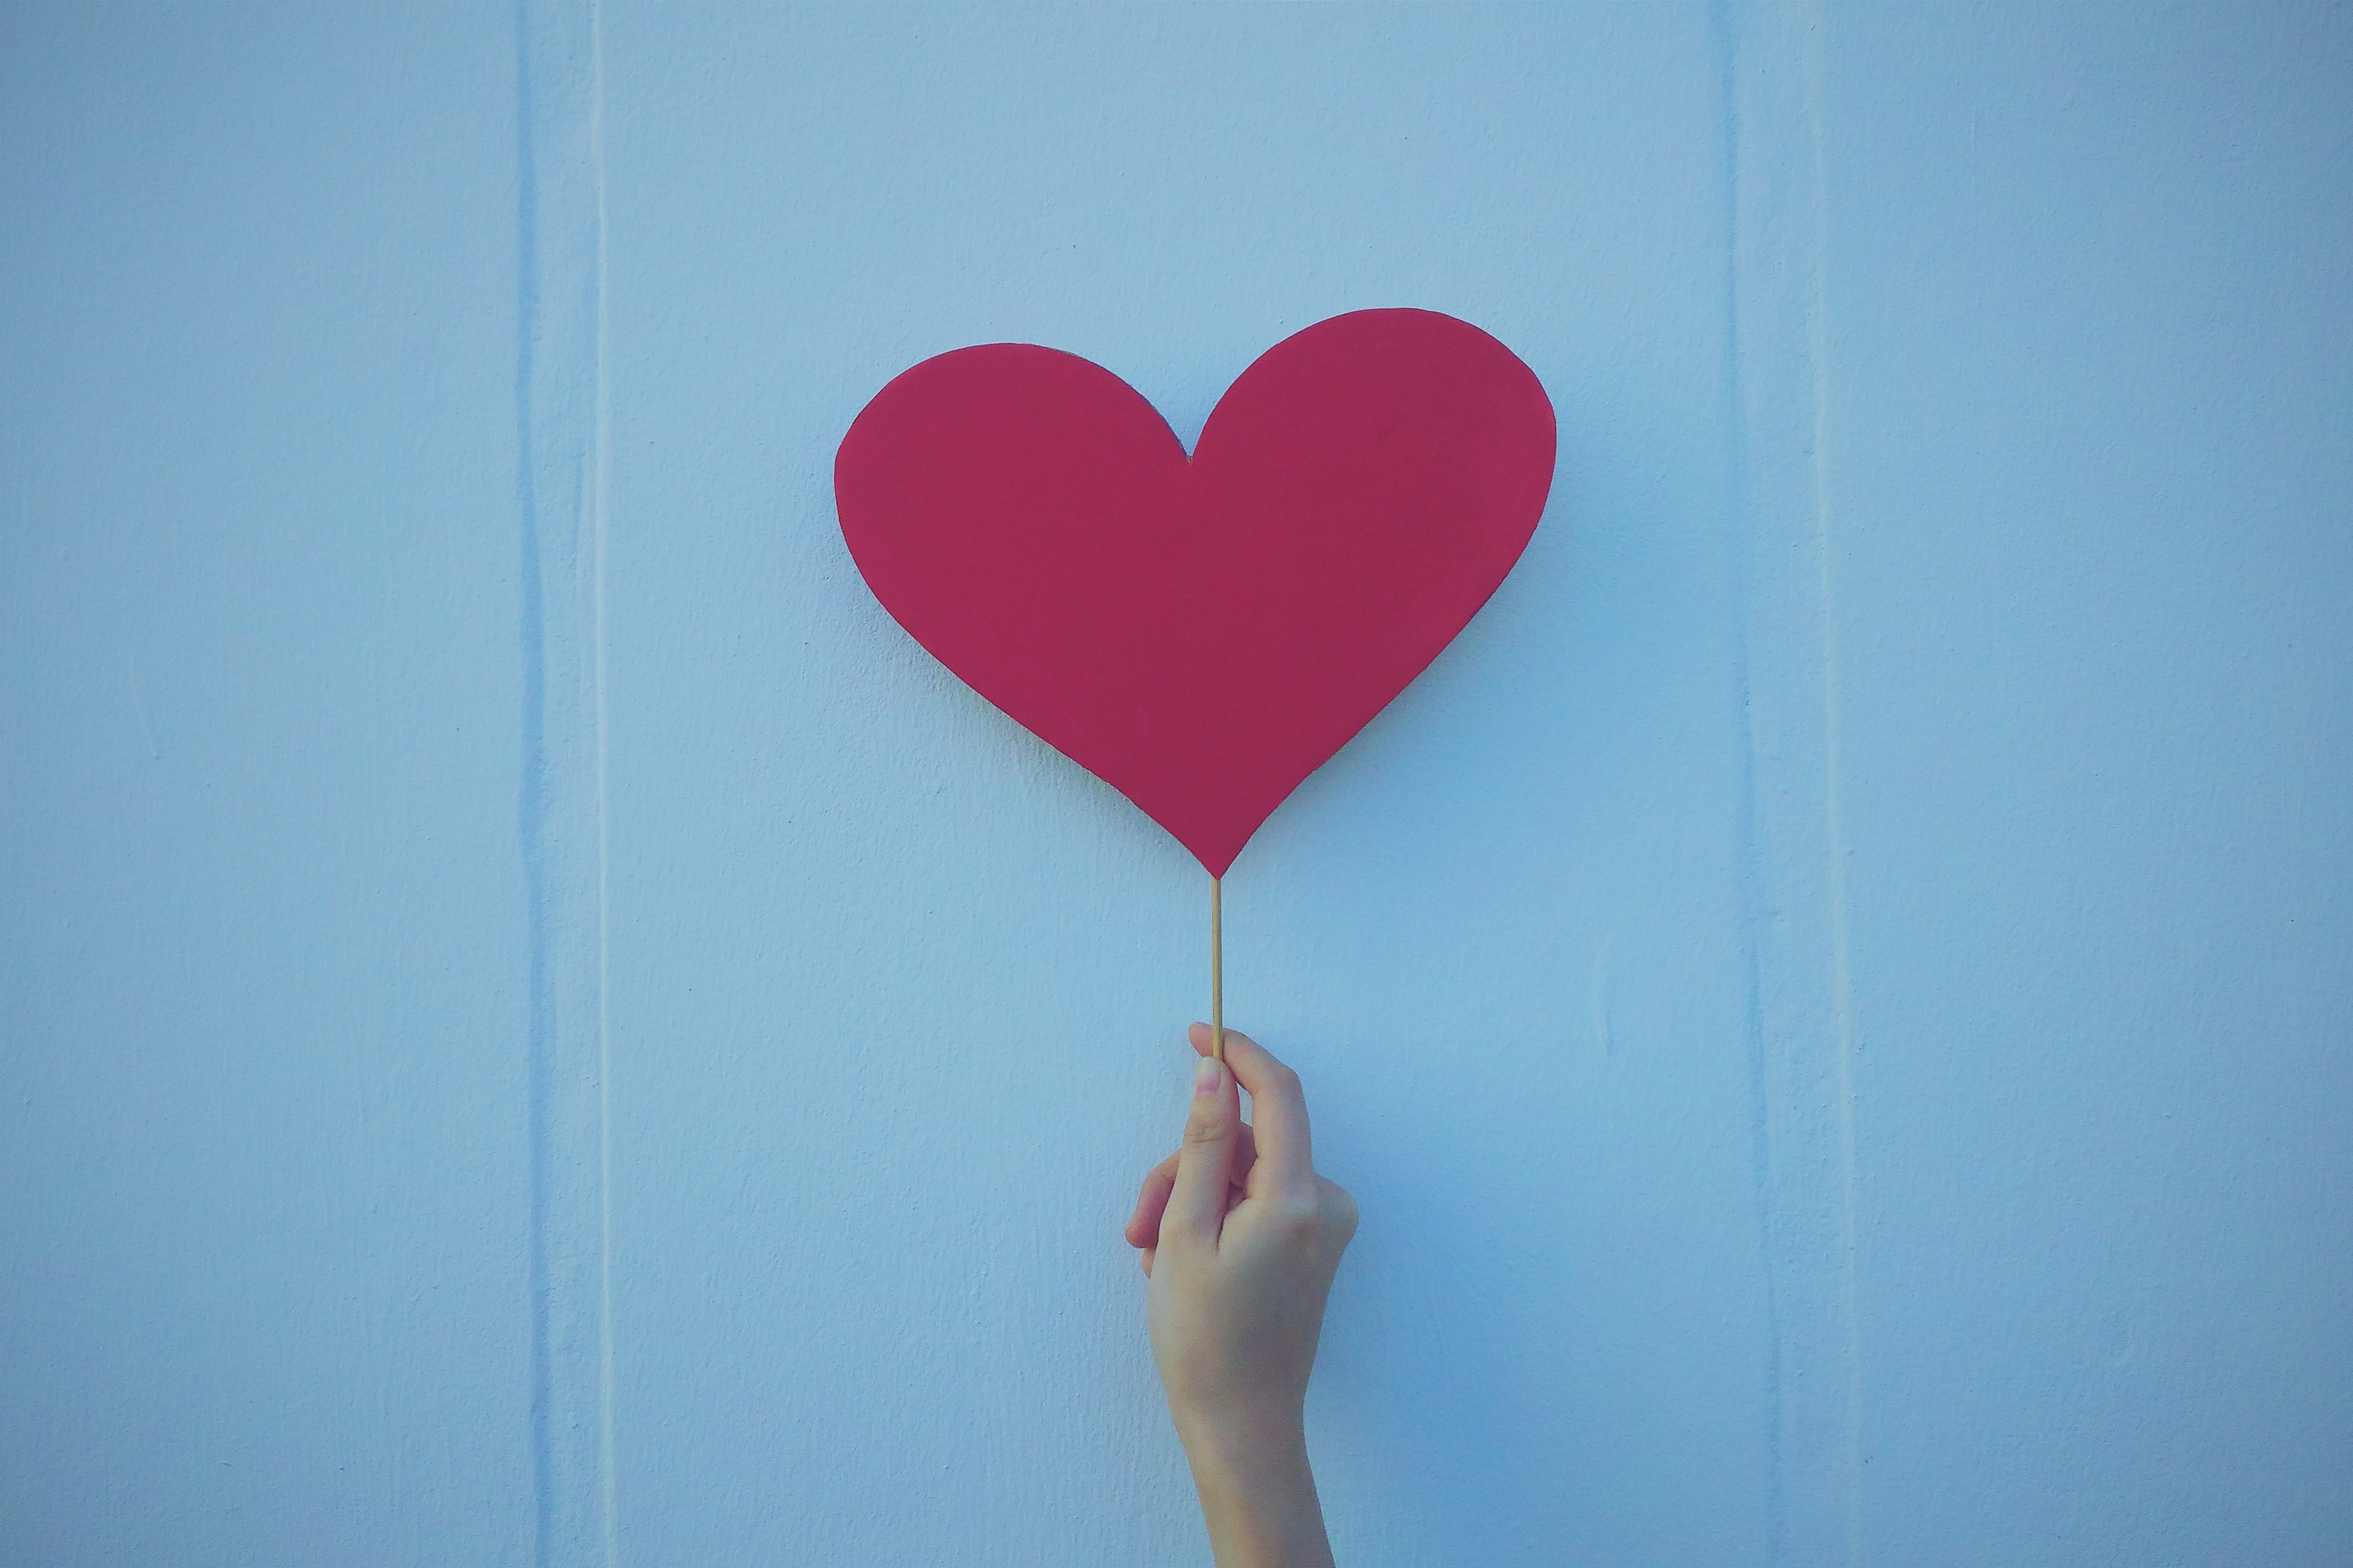 An image of a hand holding up a paper heart on a stick in front of a blue background